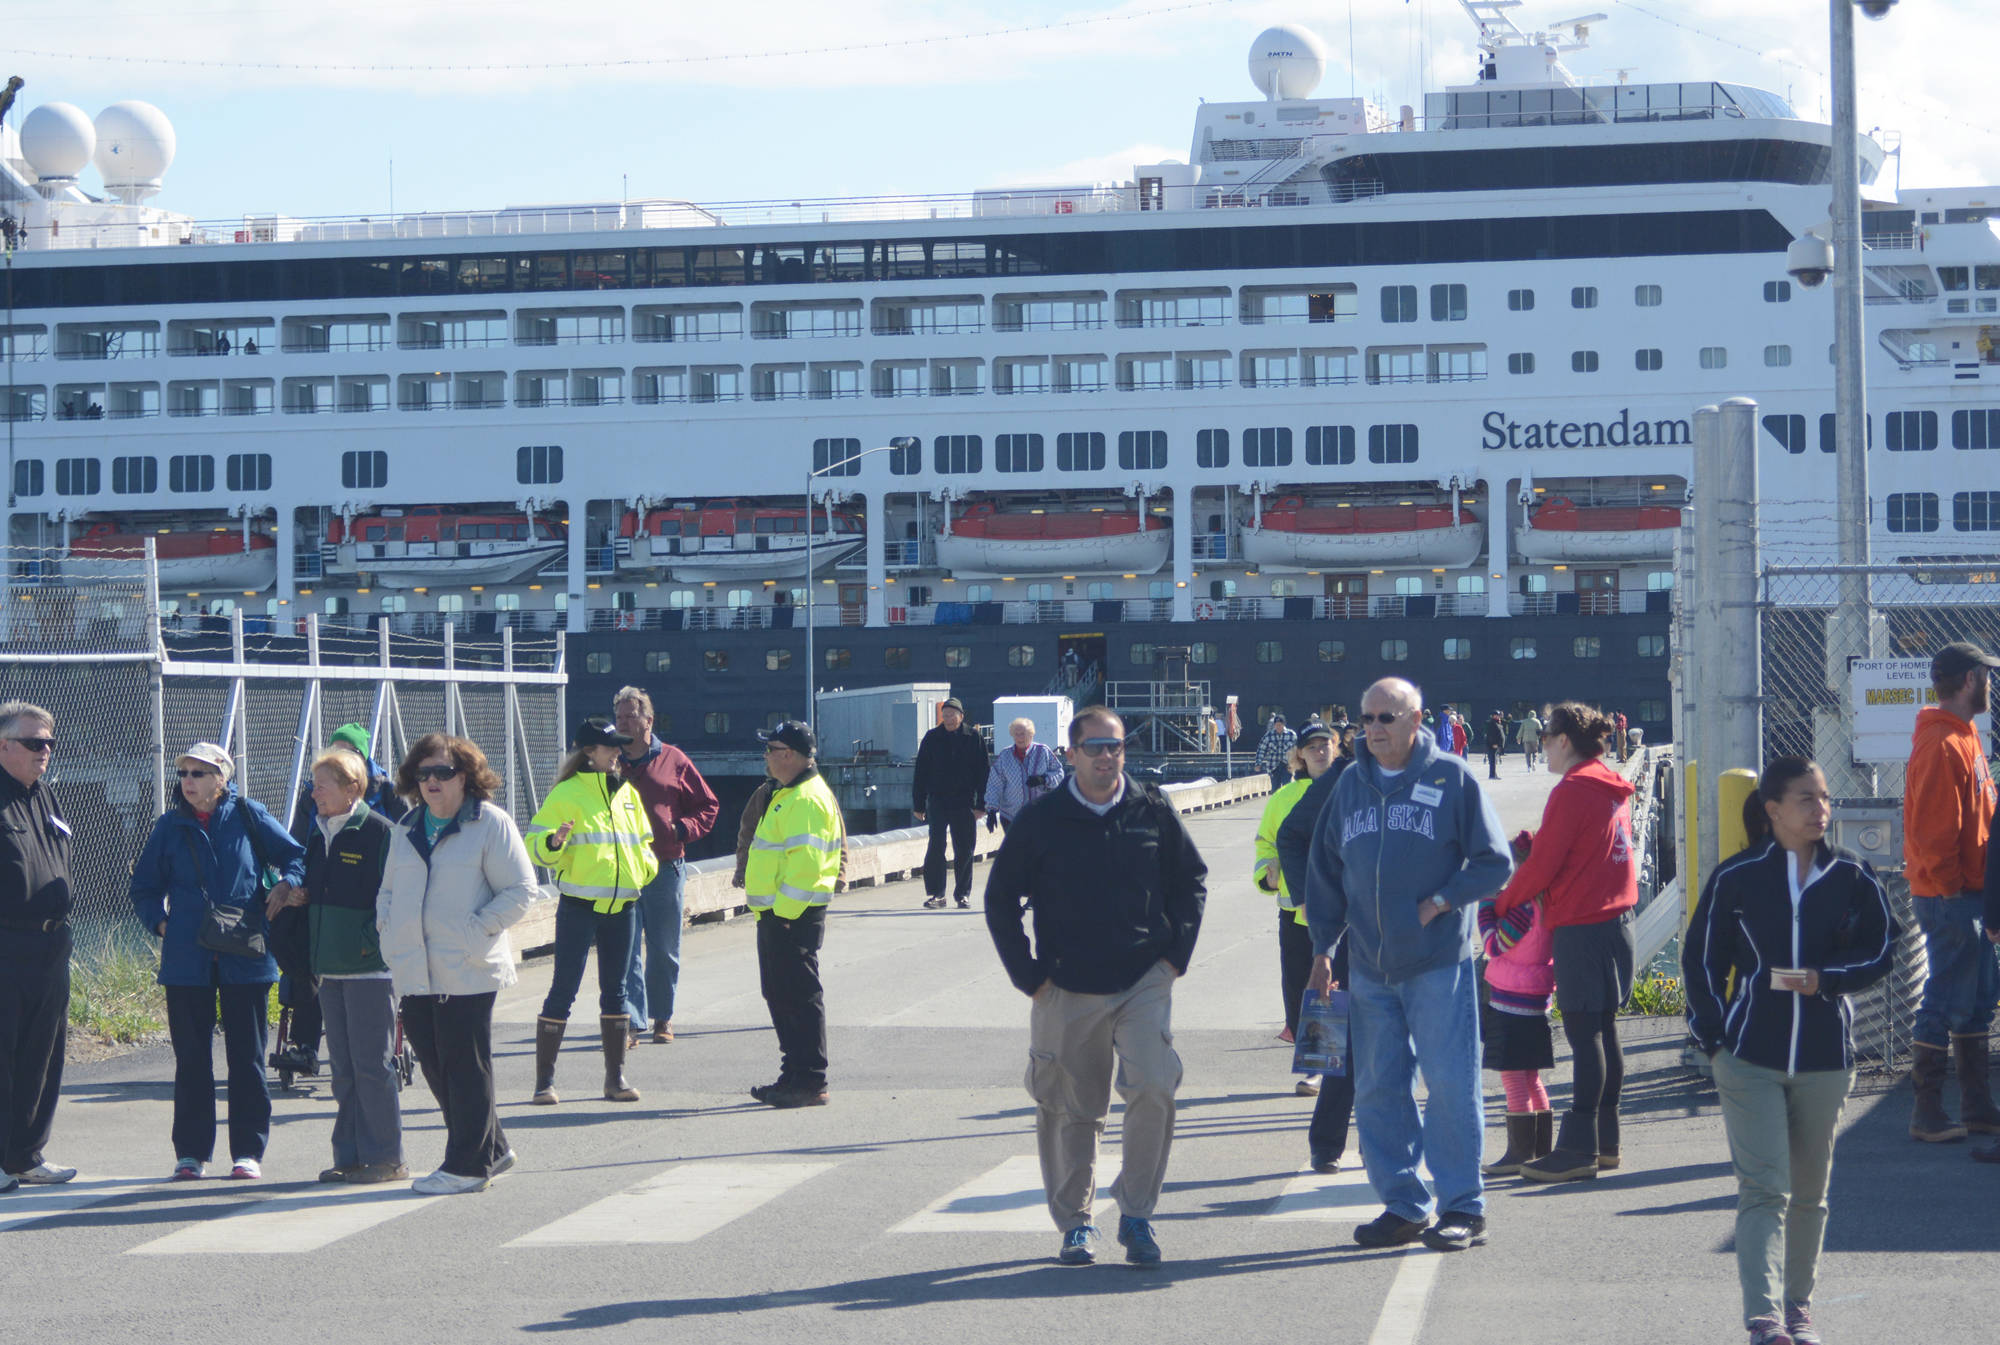 Passengers disembark from the M/V Statendam in May 2015 in Homer after the Holland America cruise ship arrived, the first of the season that year. Holland American canceled Gulf of Alaska sailings of the M/V Maasdam, a sister ship, that included stops in Homer. (Photo by Michael Armstrong/Homer News).                                Passengers disembark from the M/V Statendam in May 2015 in Homer after the Holland America cruise ship arrived, the first of the season that year. Holland American canceled Gulf of Alaska sailings of the M/V Maasdam, a sister ship, that included stops in Homer. (Photo by Michael Armstrong/Homer News).